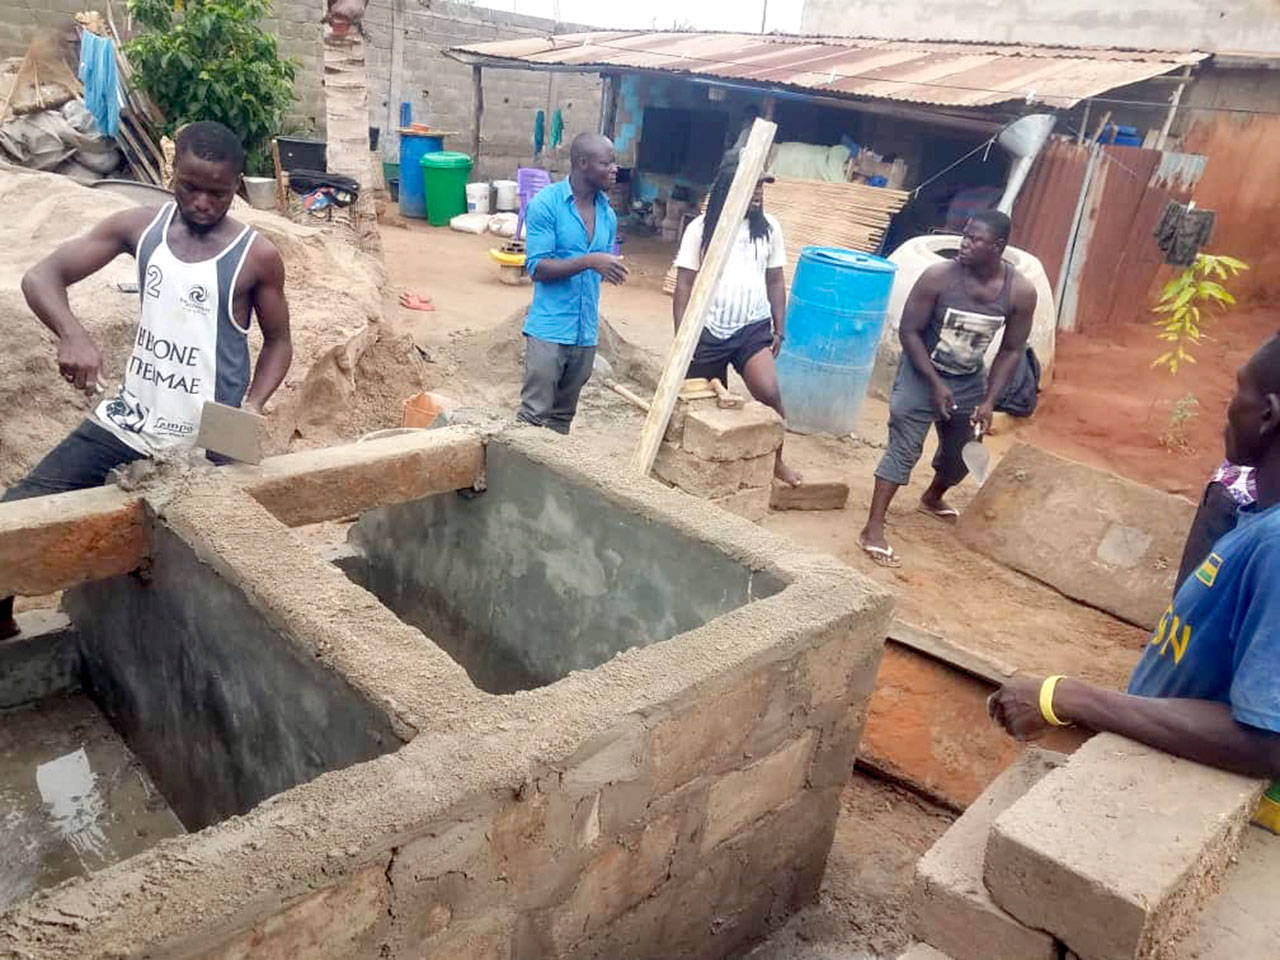 Workers build a composting toilet for a family in Togo.